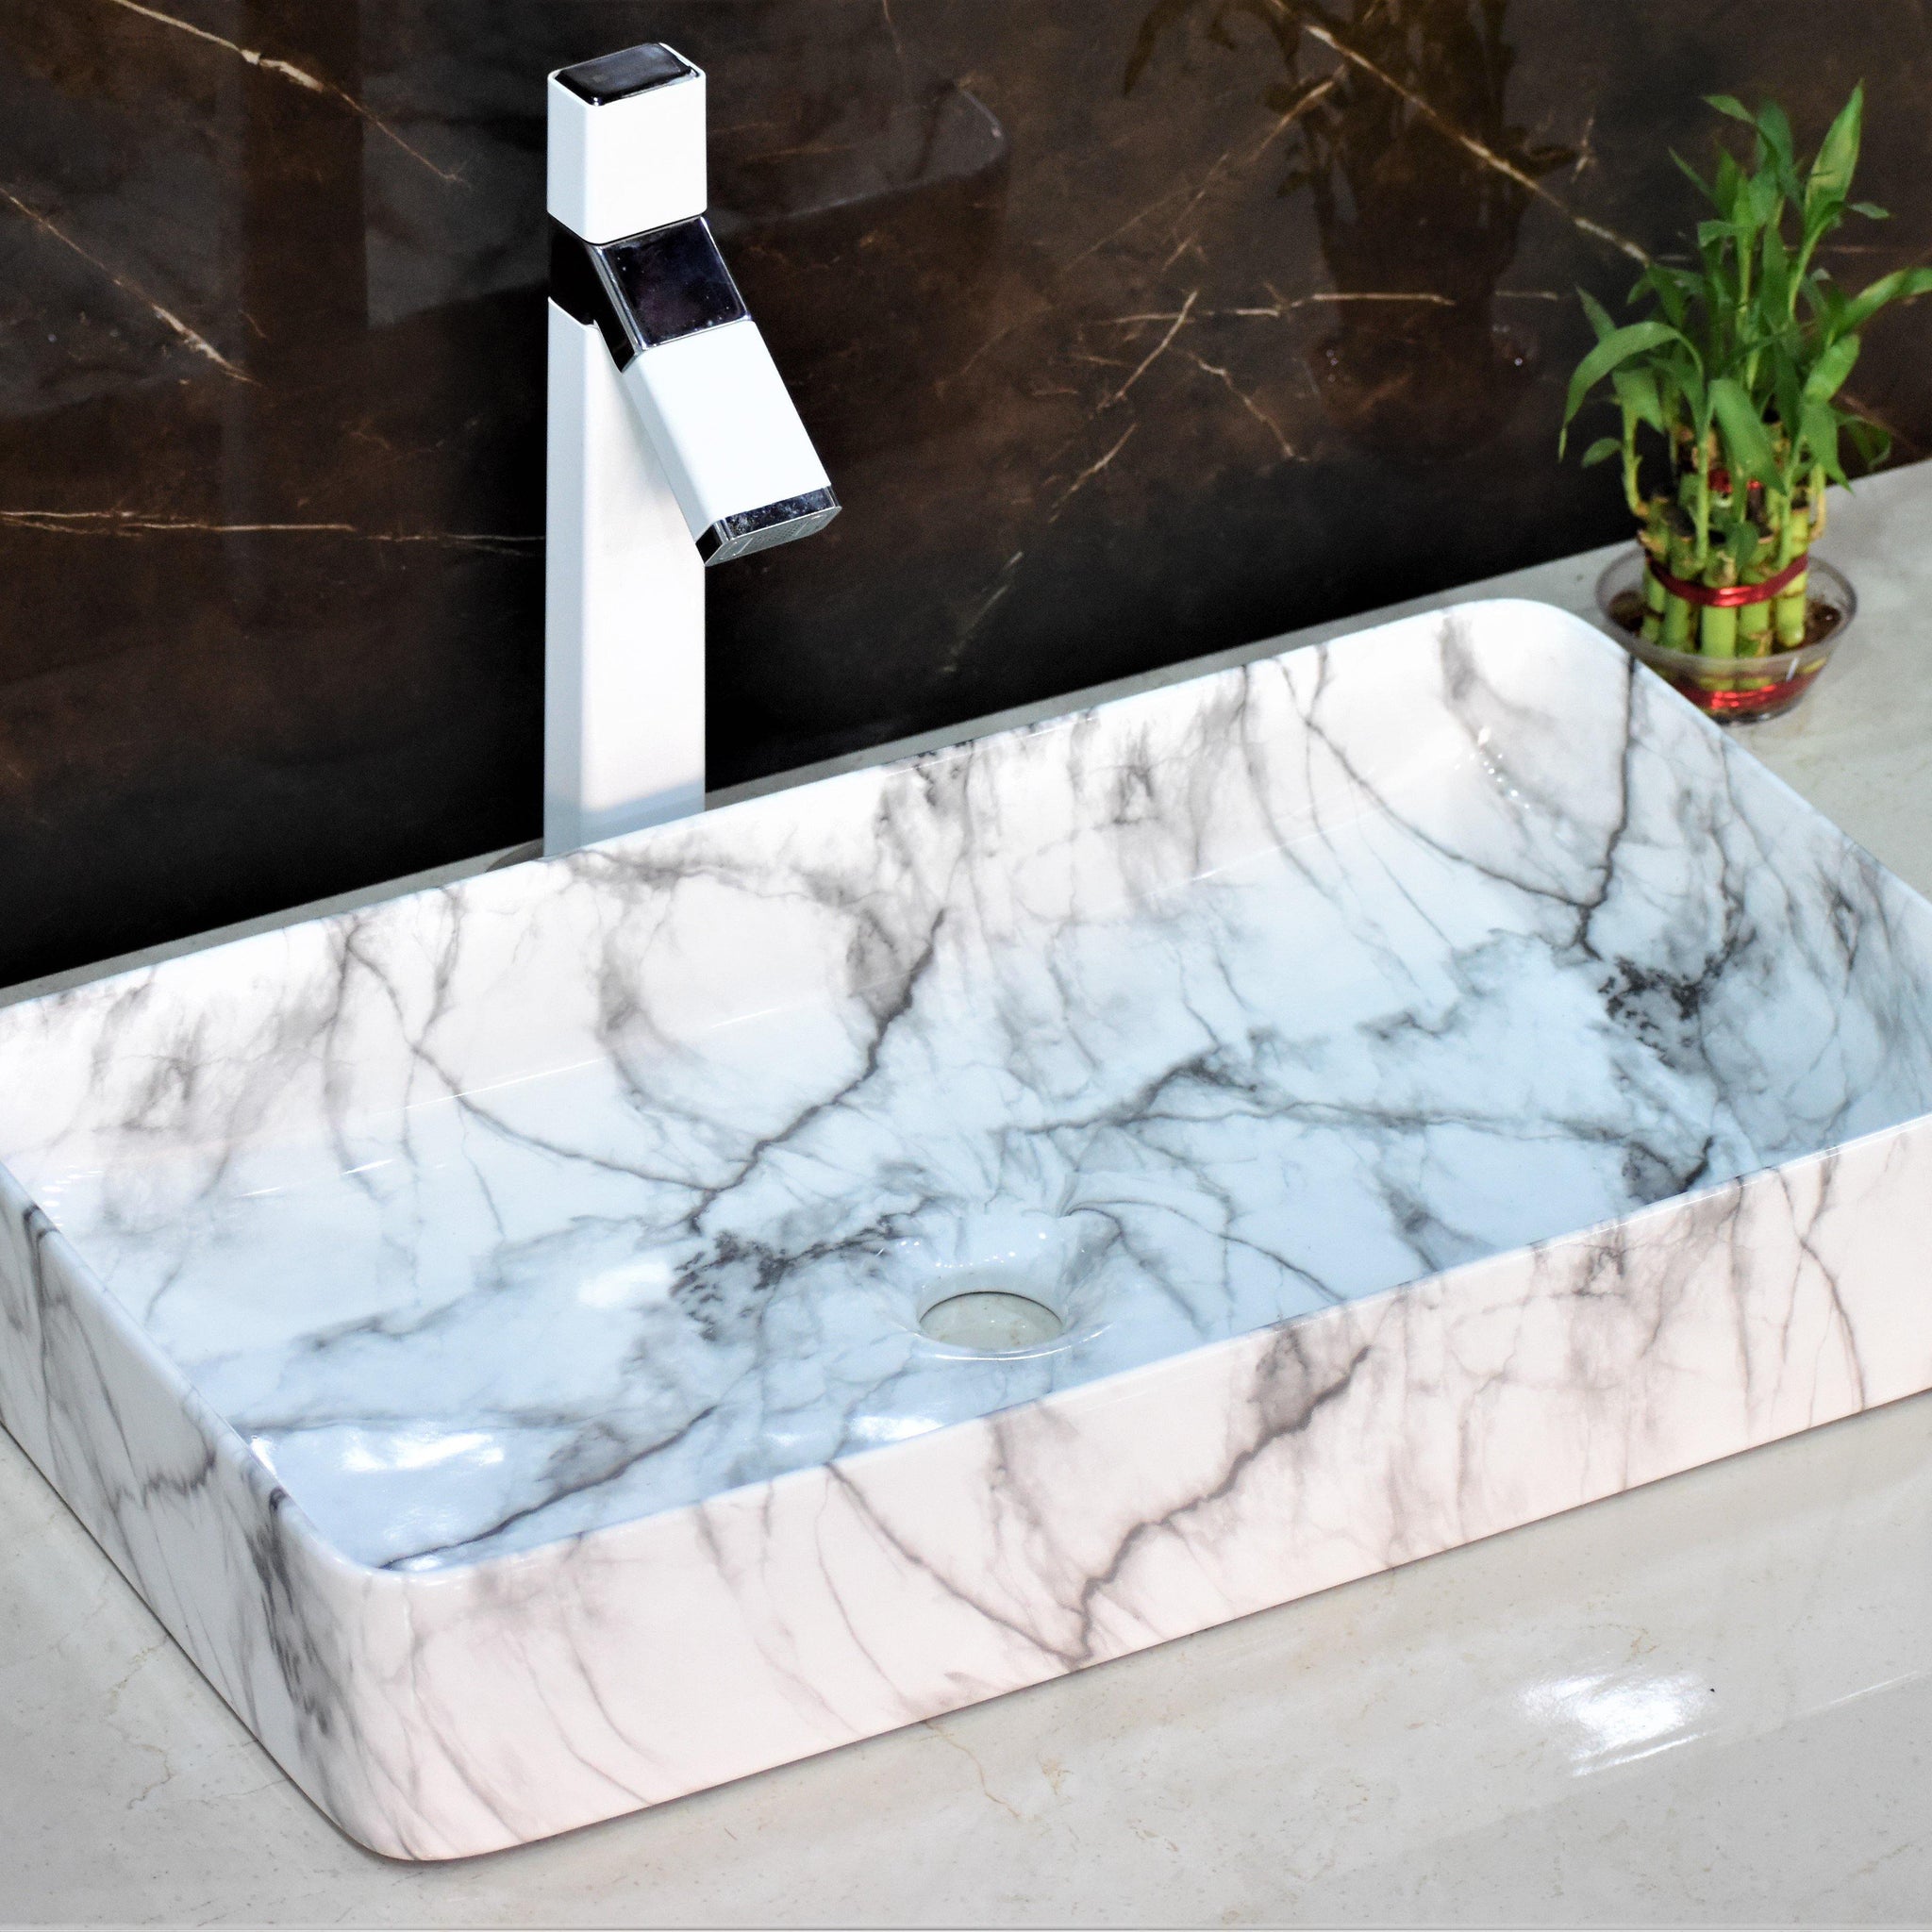 Ceramic Premium Desisgner Table Top Over Counter Vessel Sink Wash Basin for Bathroom 24 x 14 x 4.5 Inch Rectangle Shape White Marble - Bath Outlet